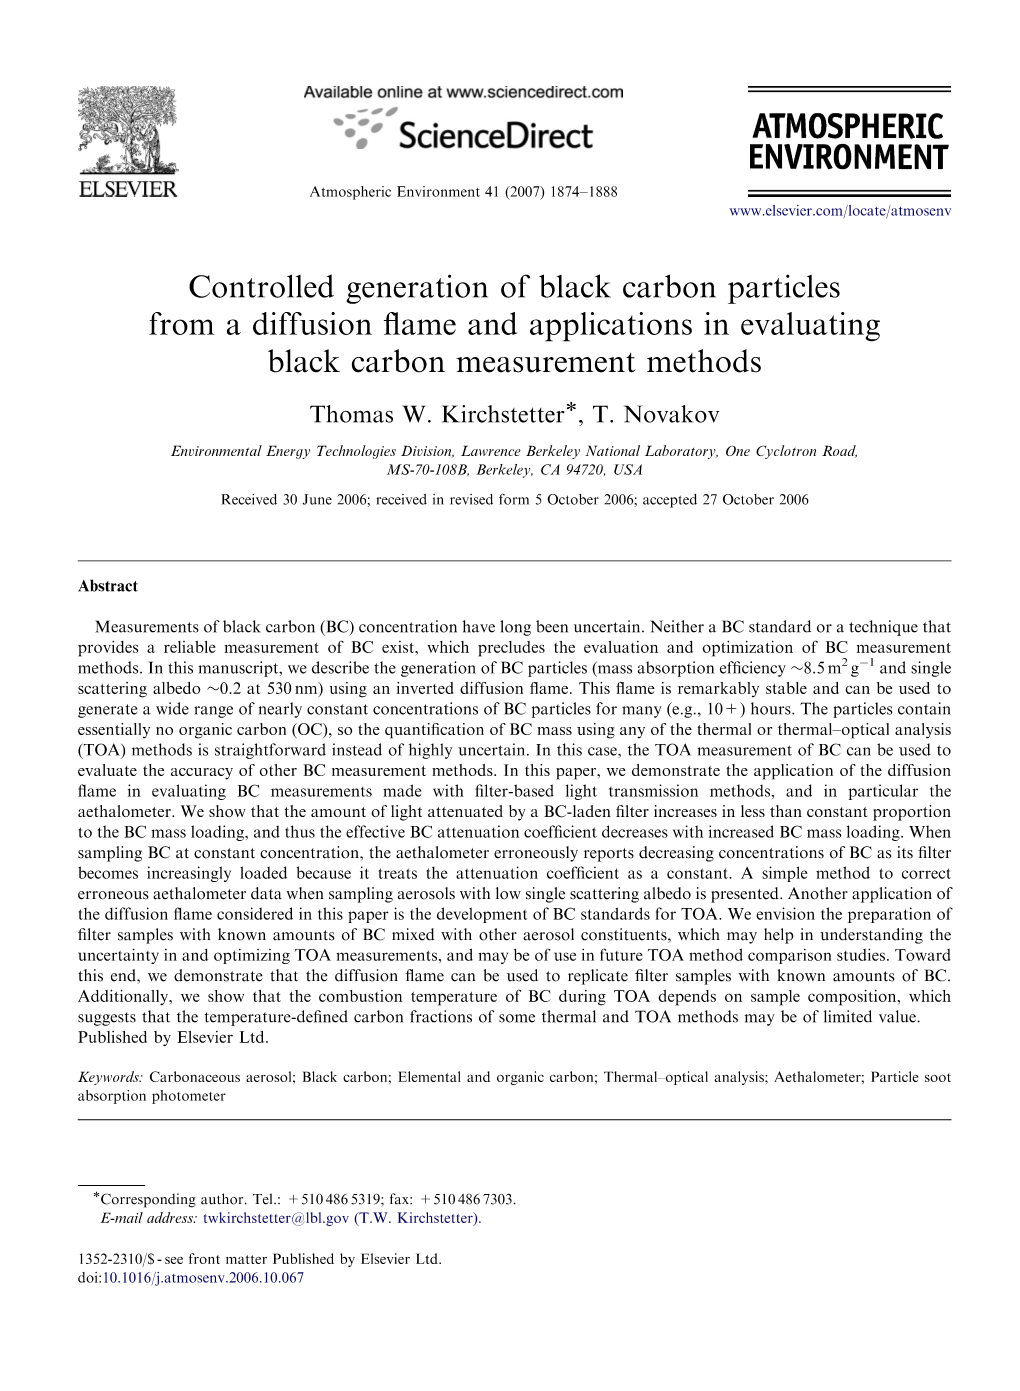 Controlled Generation of Black Carbon Particles from a Diffusion Flame And